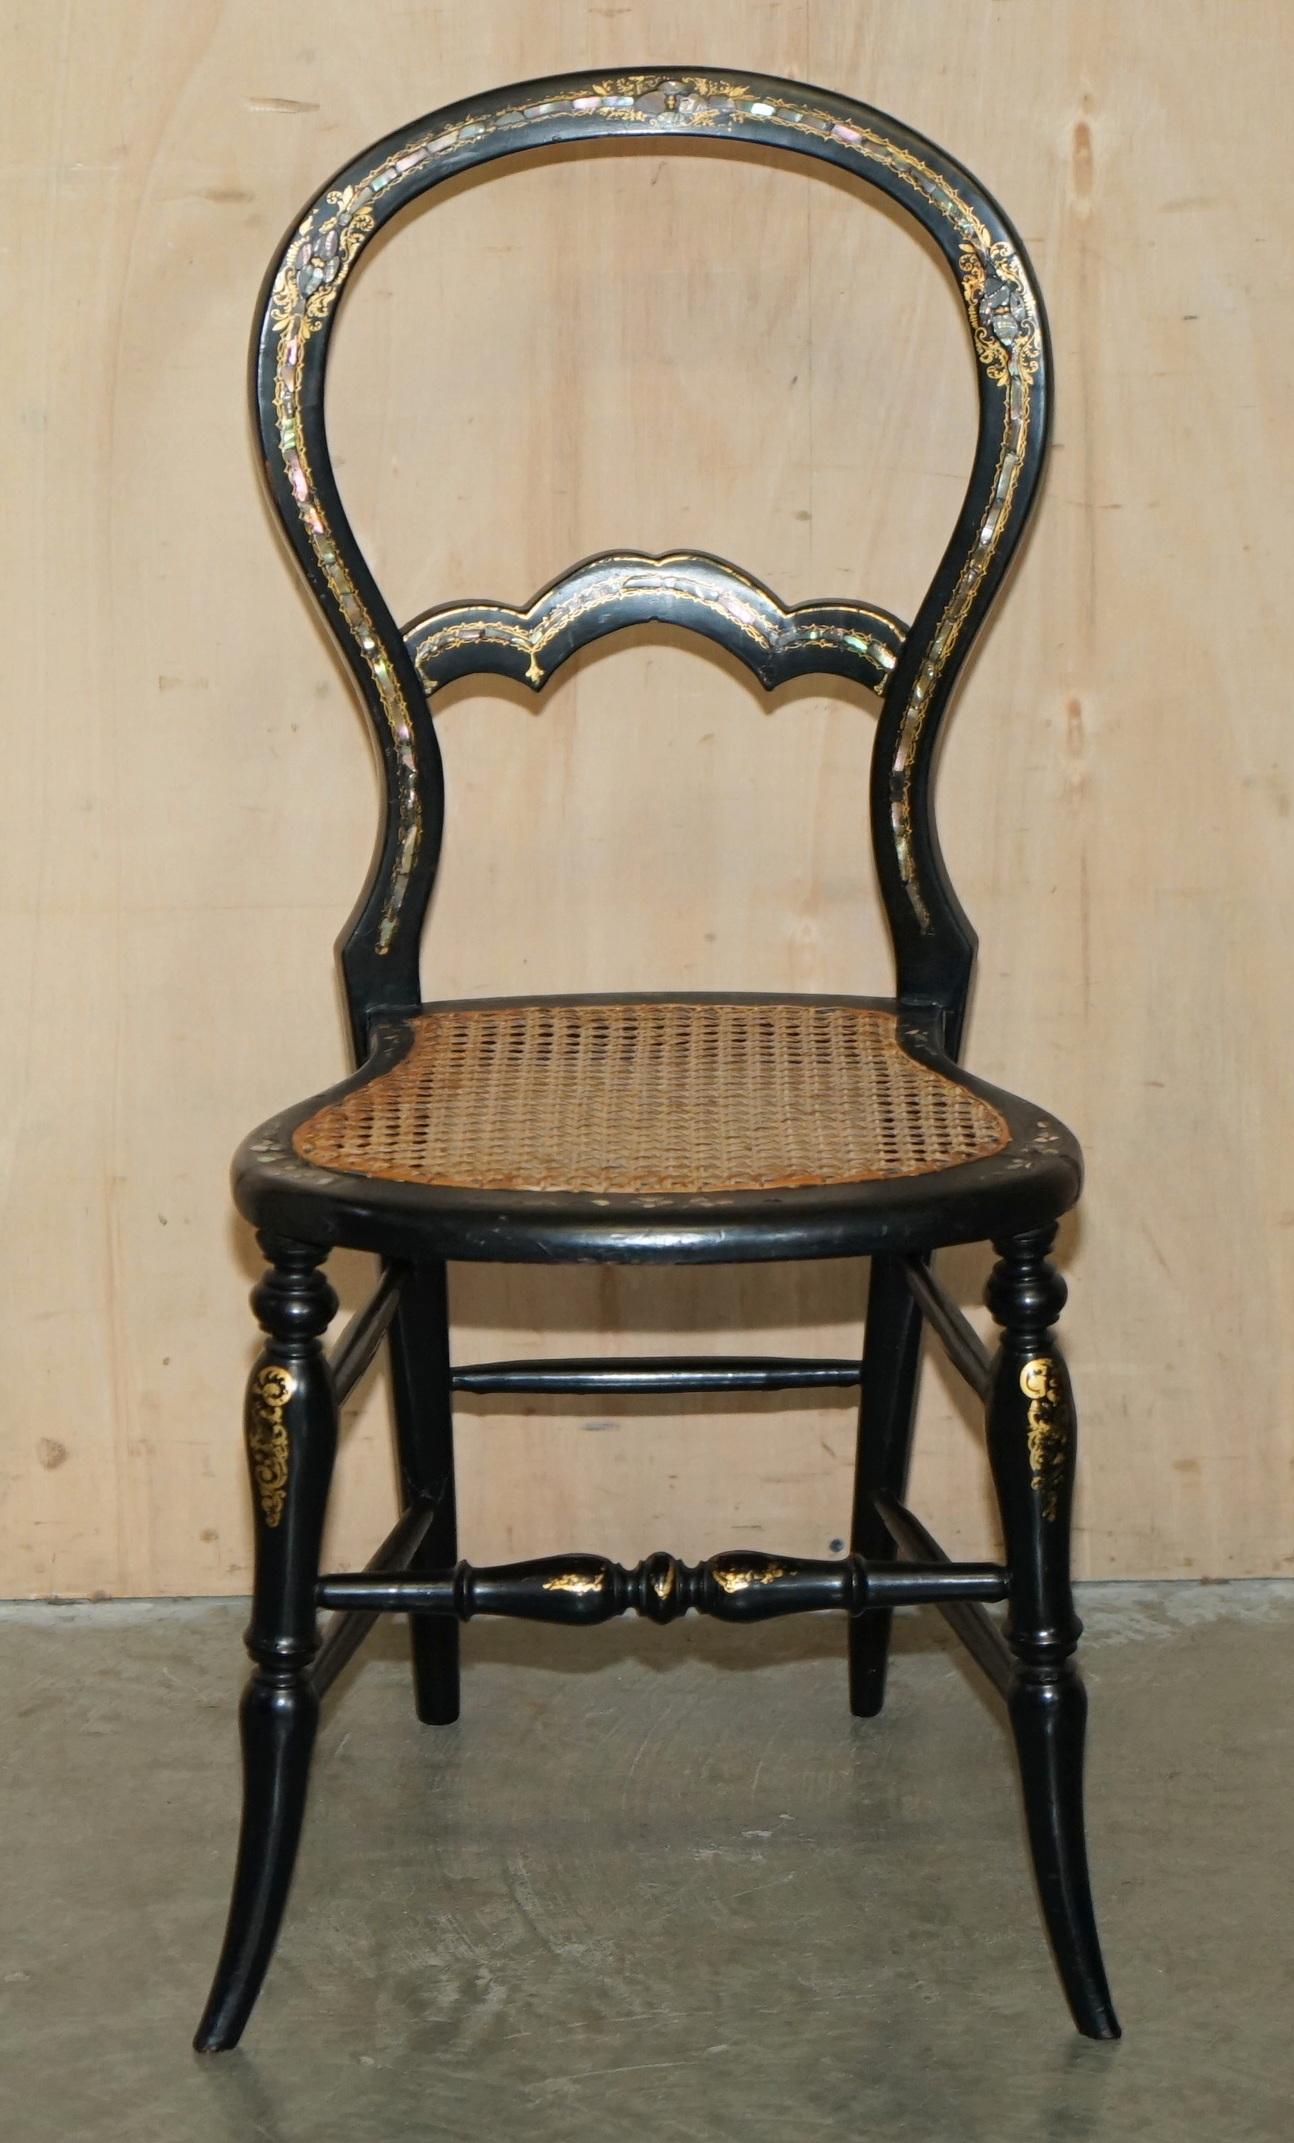 VIER FINE UND ANTIQUE REGENCY BERGERE MOTHER OF PEARL EBONISED SIDE CHAIRs im Angebot 12